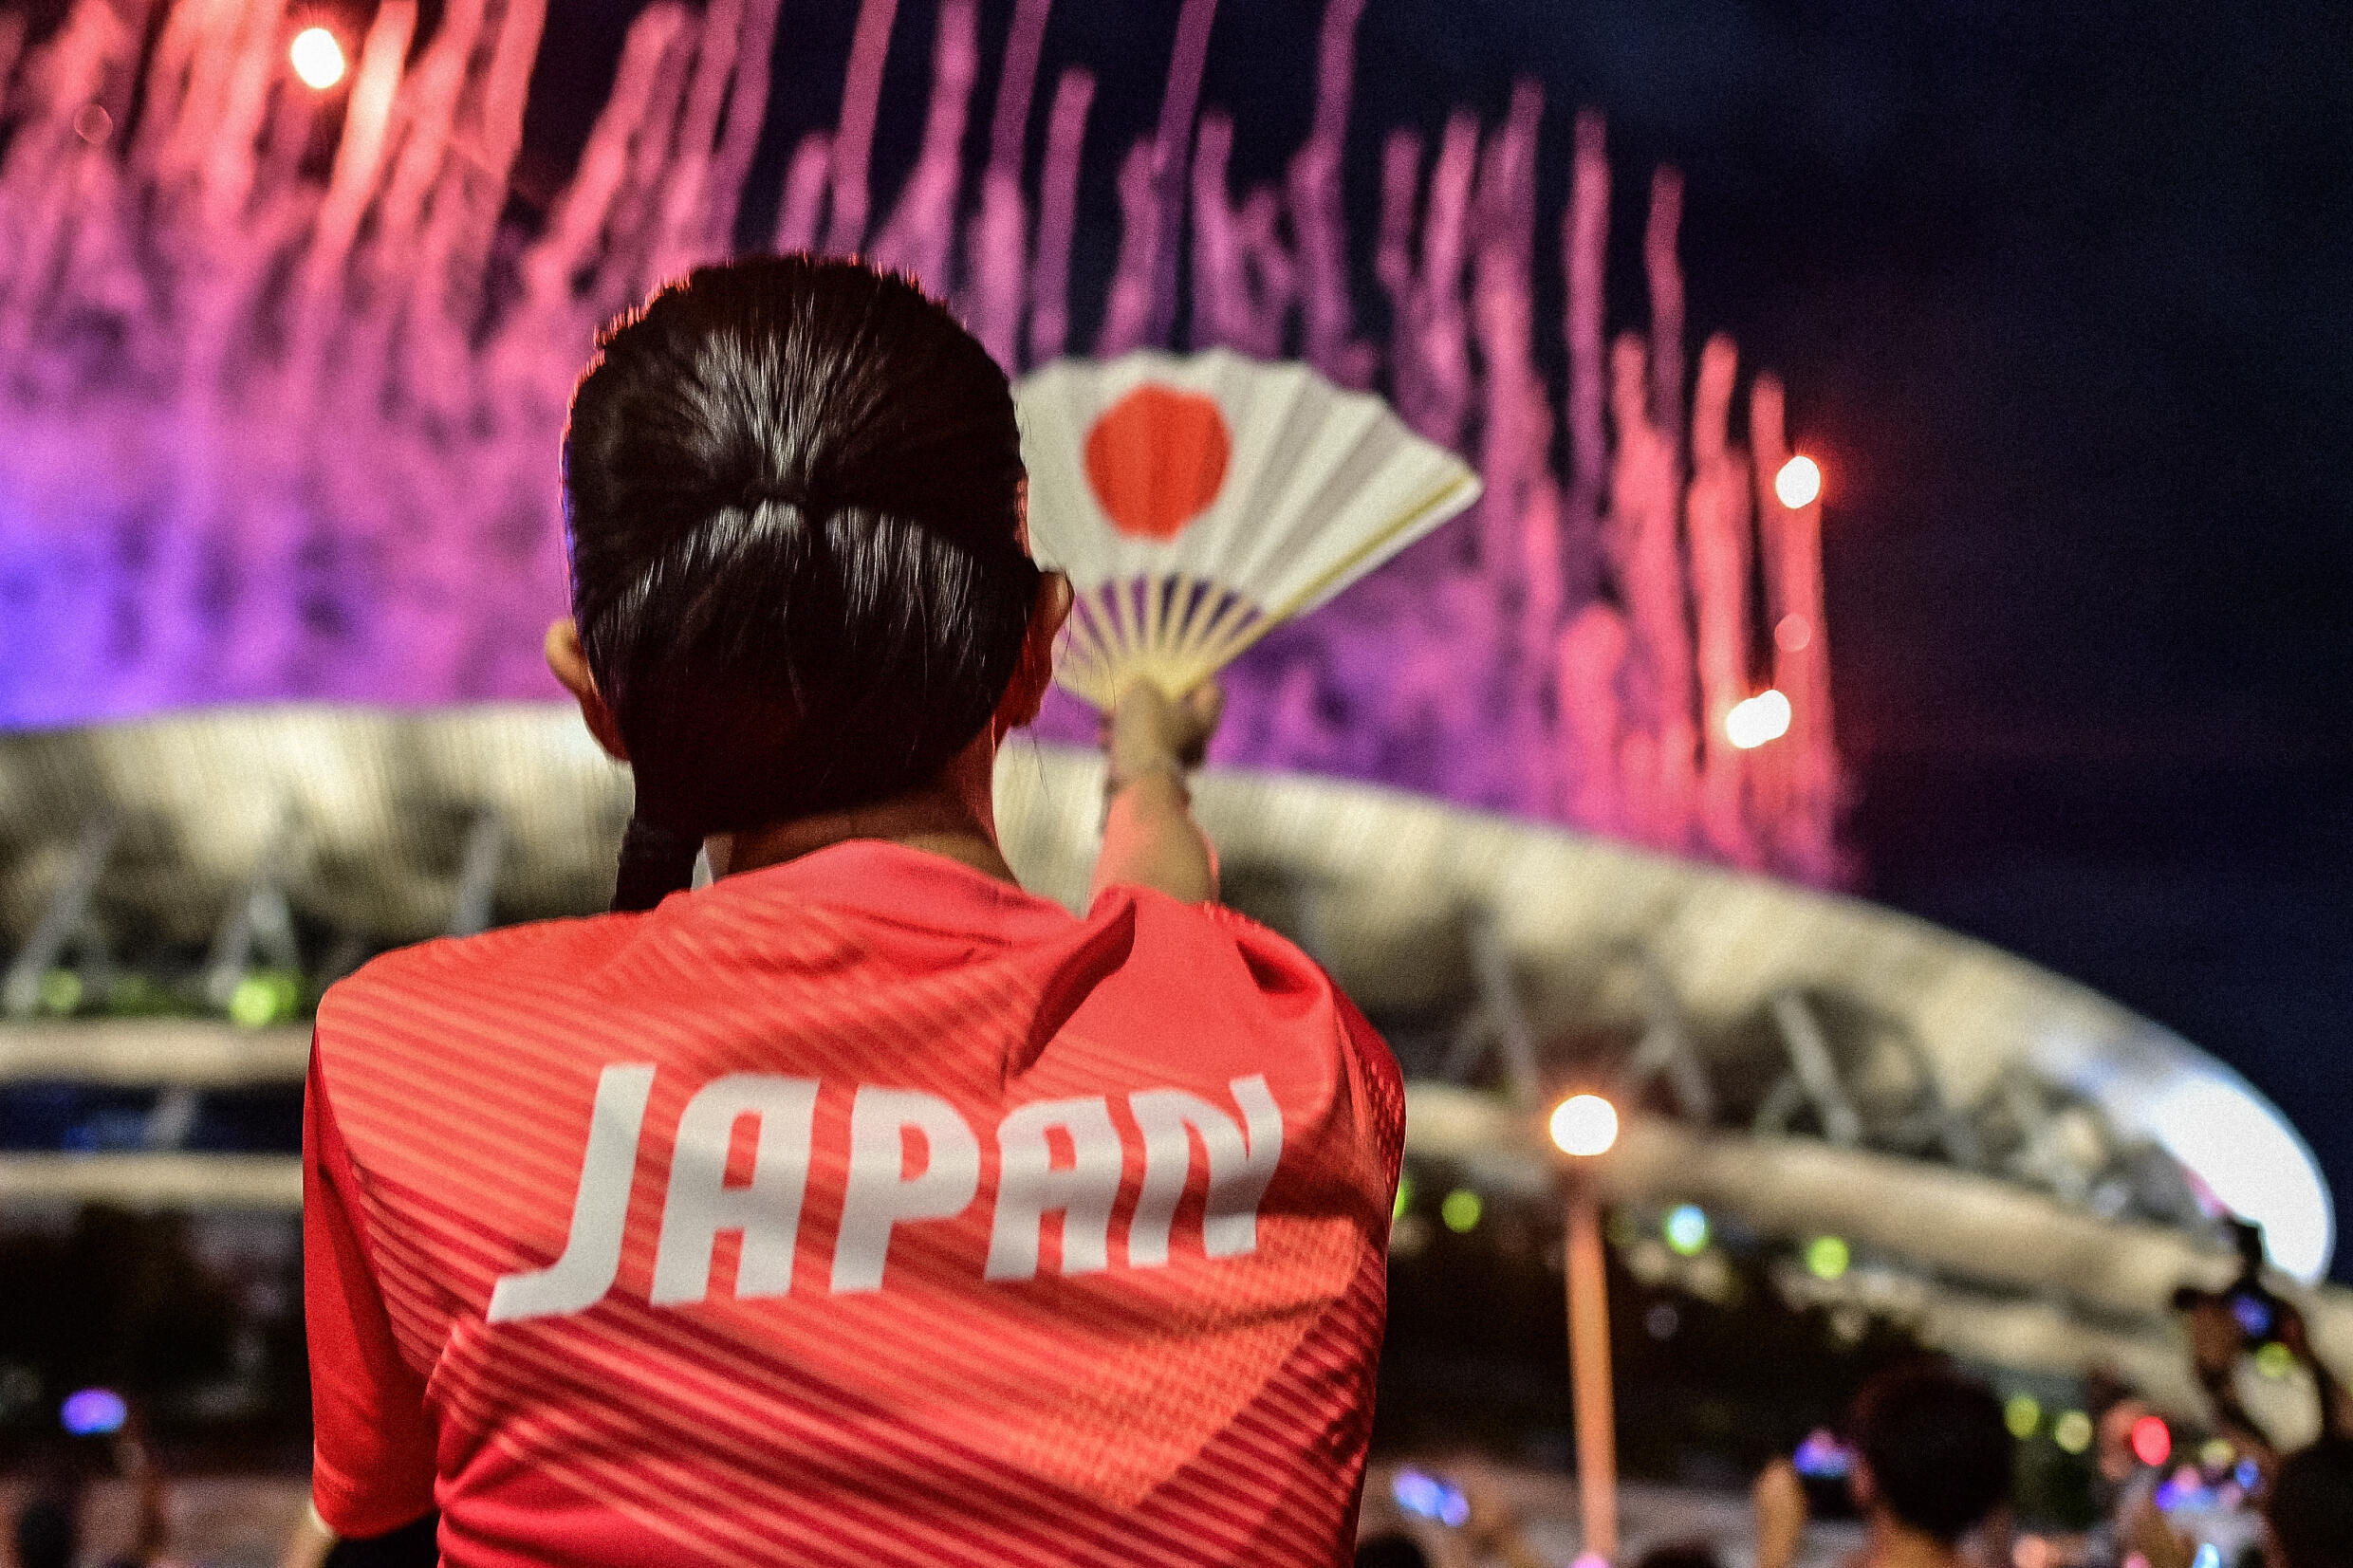 A Japanese fan during the fireworks at the Tokyo Olympic Stadium for the opening ceremony of the games on July 23, 2021, Japan